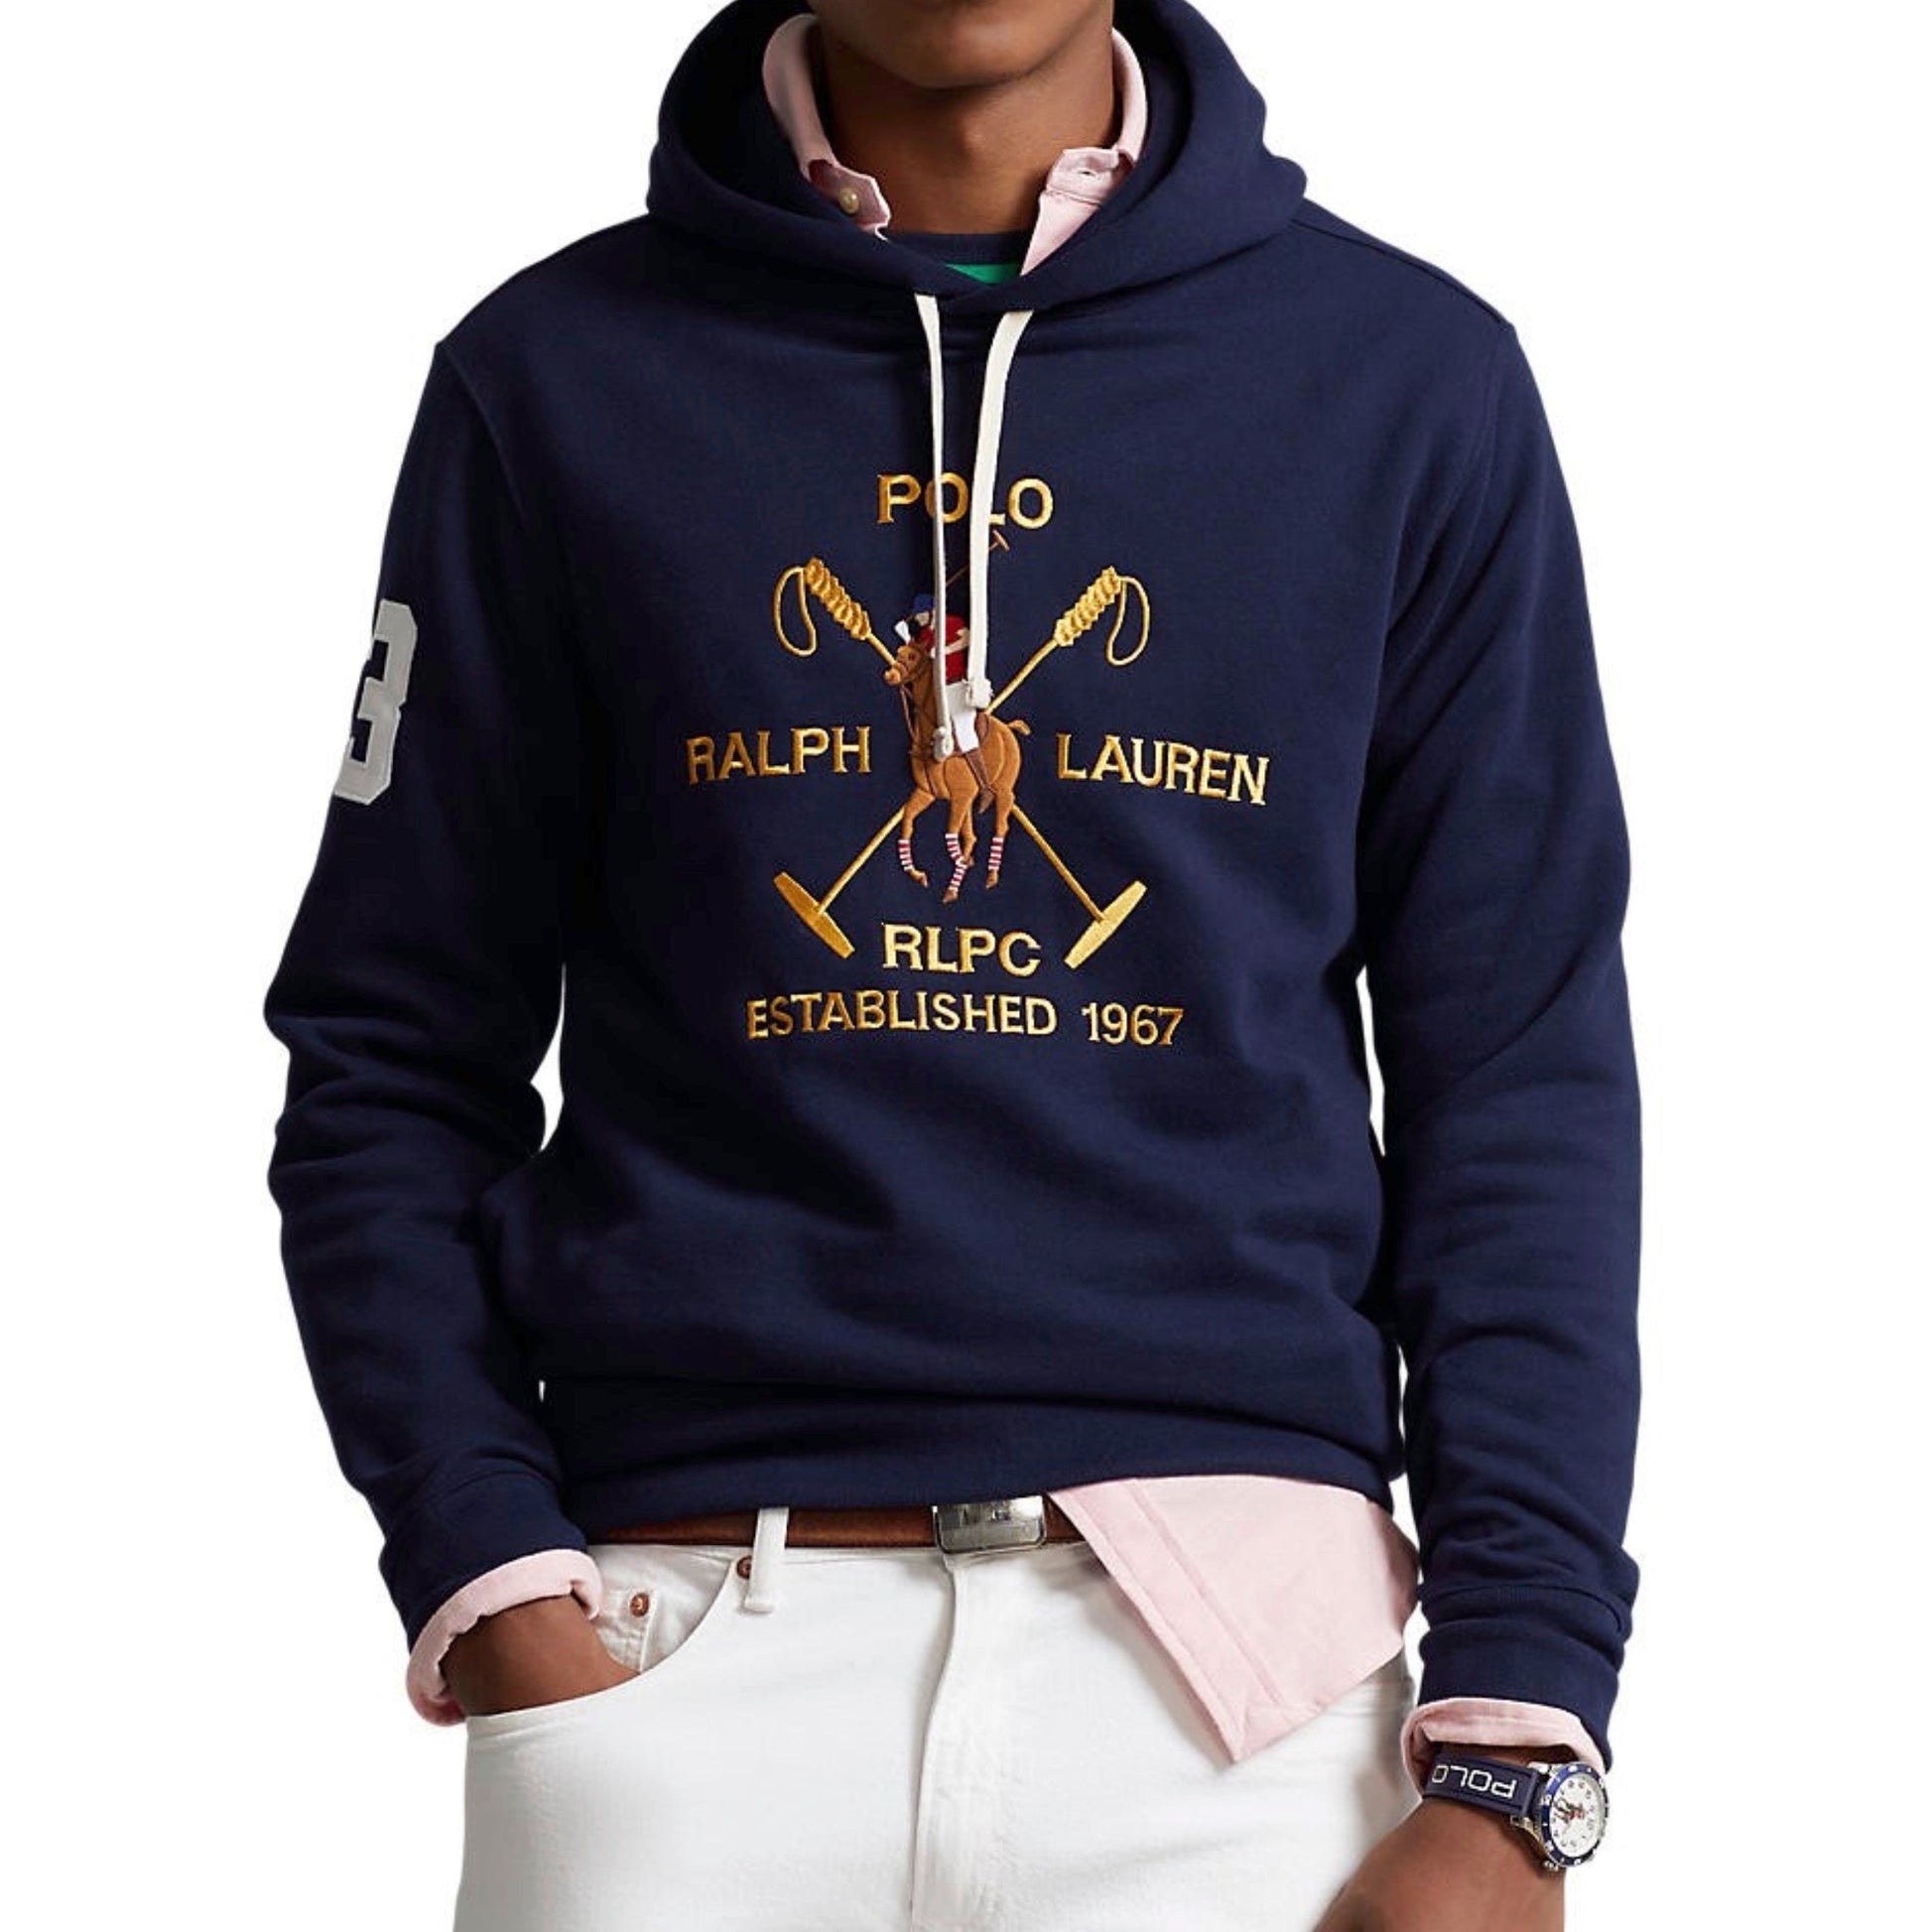 This cotton-blend hoodie features our logo, multicolored signature Pony, and founding year intricately embroidered at the front. Ralph Lauren partners with Better Cotton™ to improve cotton farming globally. Better Cotton trains farmers to use water efficiently, care for the health of the soil and natural habitats, reduce use of the most harmful chemicals, and implement the principles of decent work.